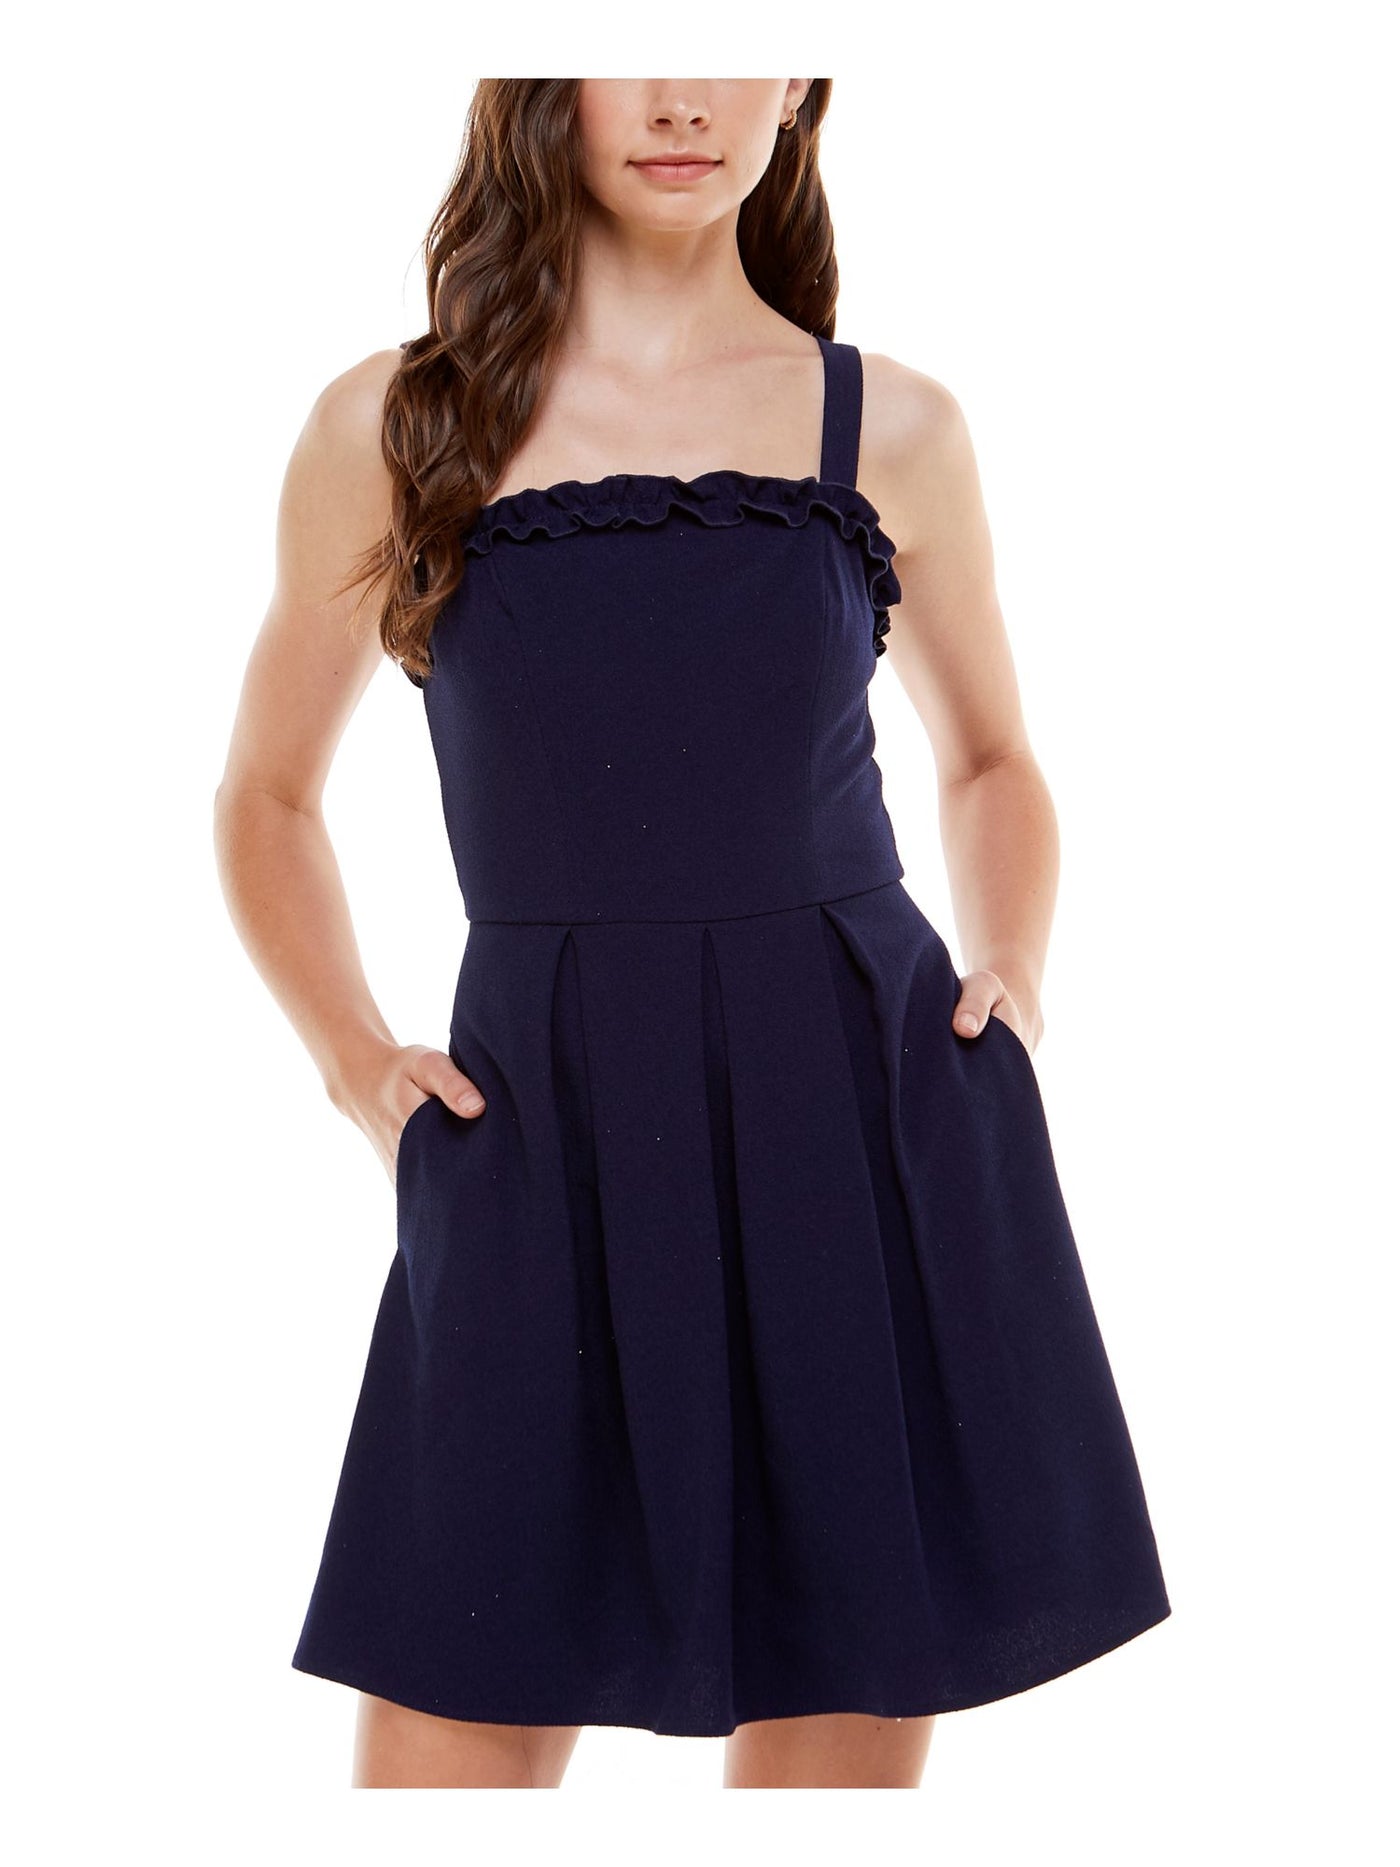 SPEECHLESS Womens Navy Stretch Zippered Pocketed Ruffled Pleated Sleeveless Square Neck Mini Party Fit + Flare Dress Juniors XS